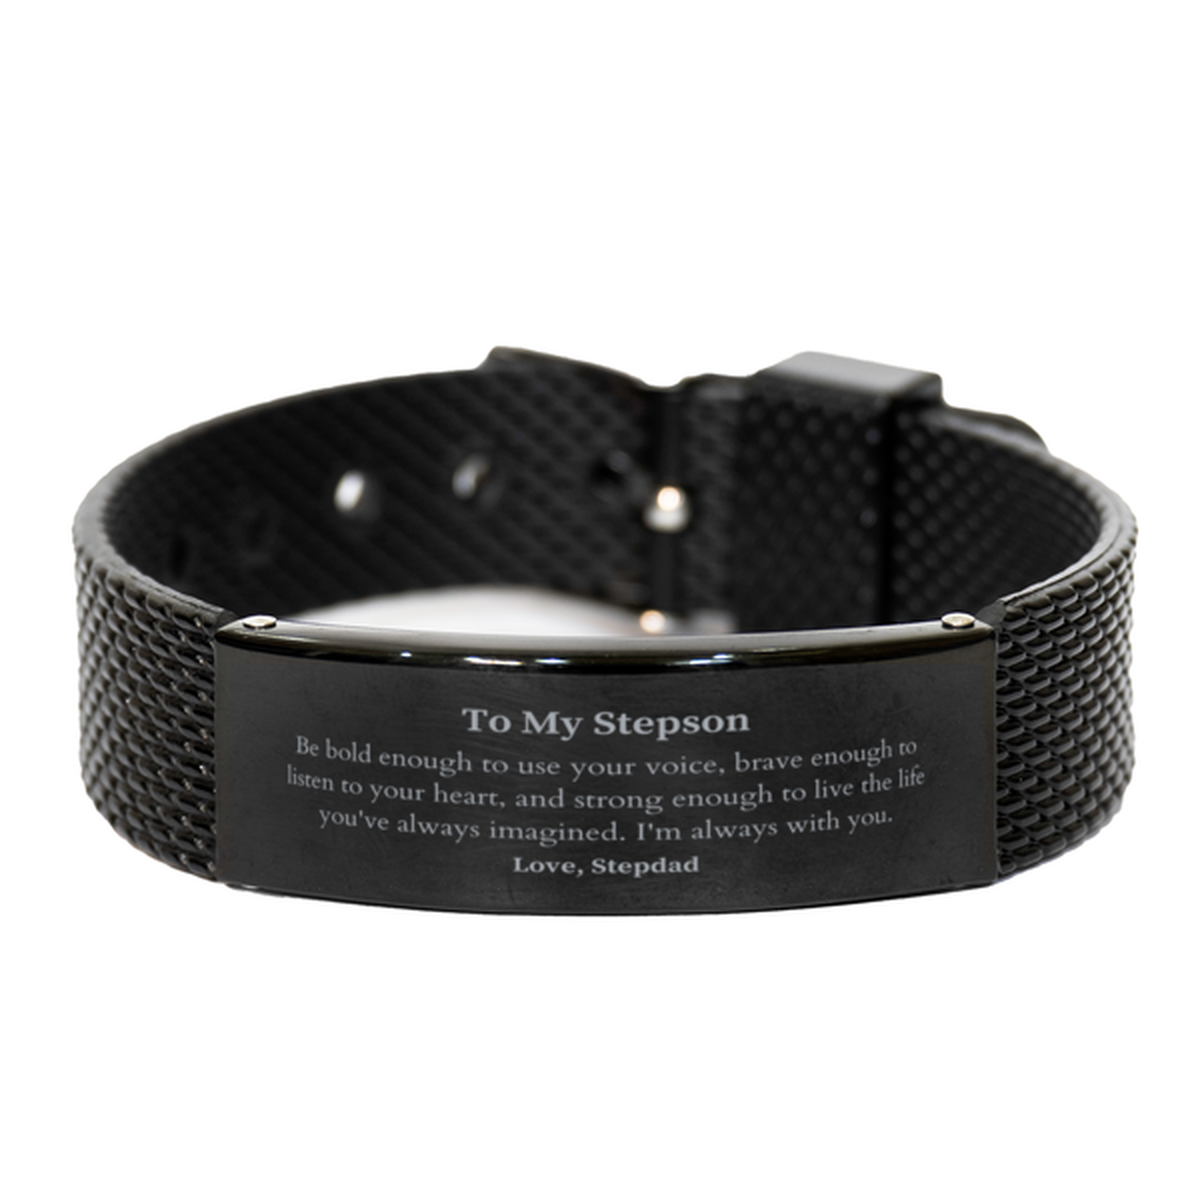 Keepsake Stepson Black Shark Mesh Bracelet Gift Idea Graduation Christmas Birthday Stepson from Stepdad, Stepson Be bold enough to use your voice, brave enough to listen to your heart. Love, Stepdad